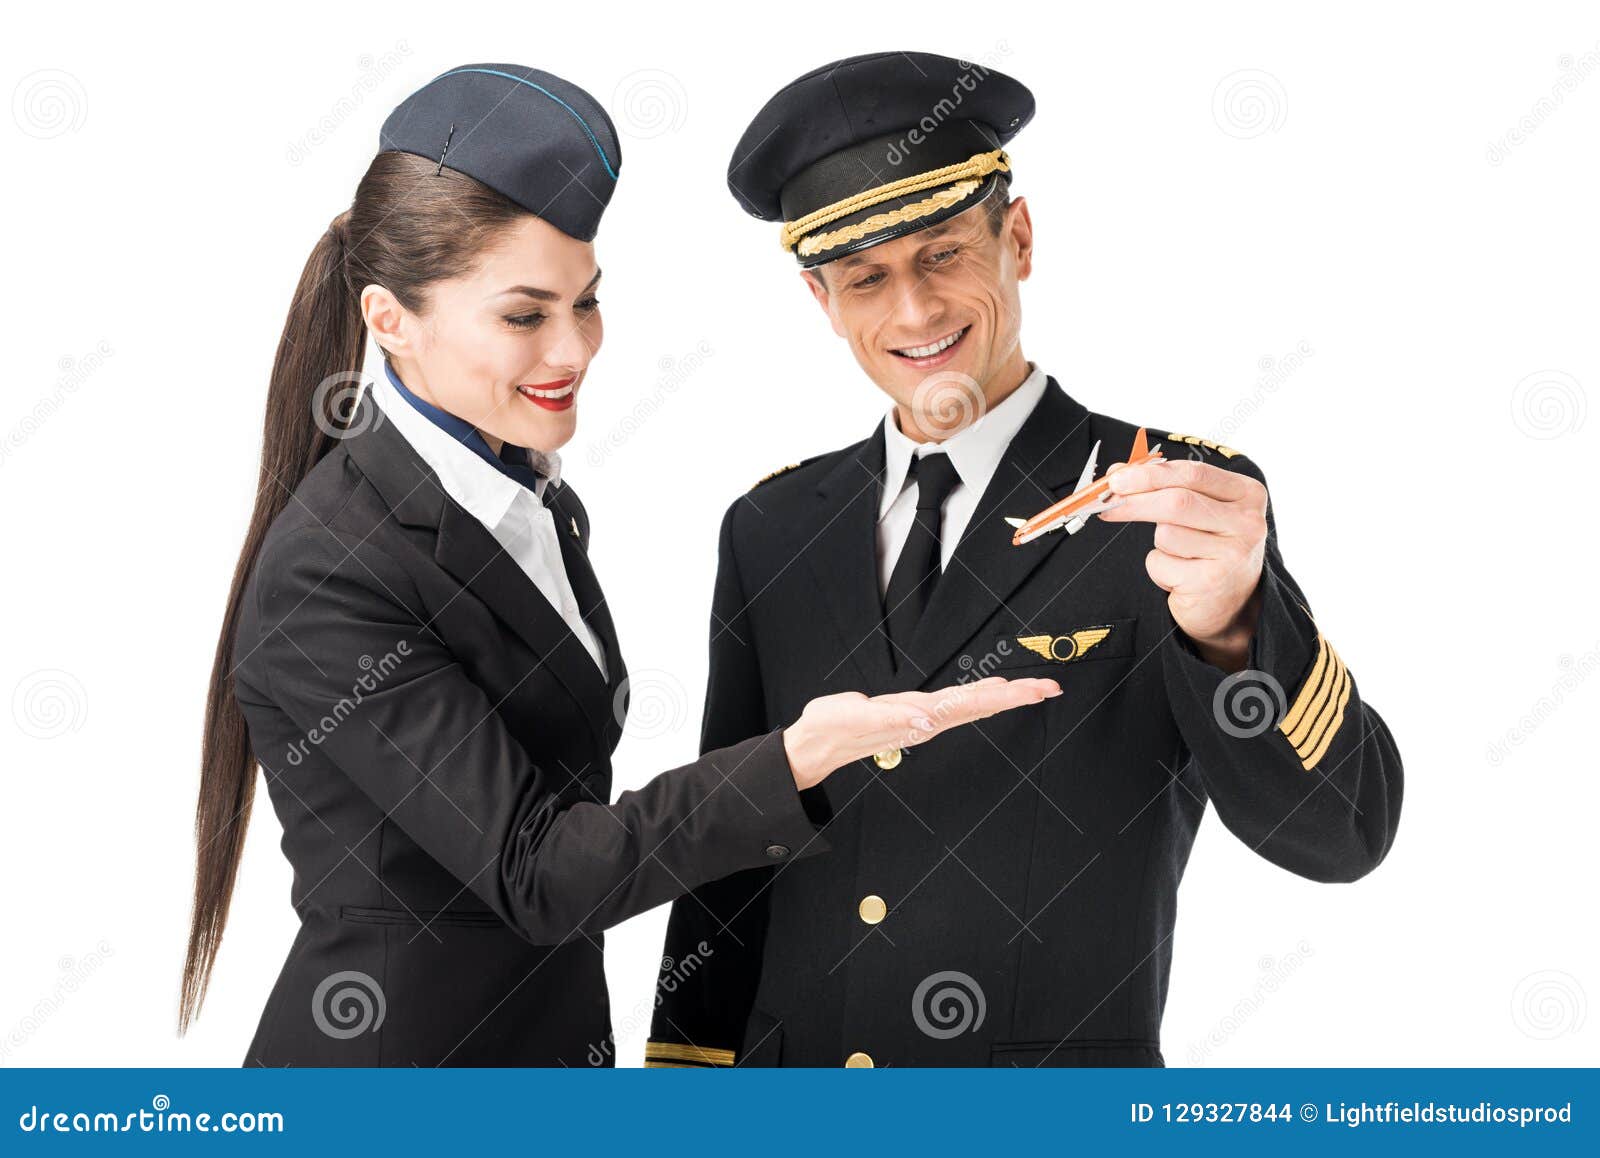 Airline Captain and Stewardess Holding Toy Plane Stock Photo - Image of  aviator, profession: 129327844